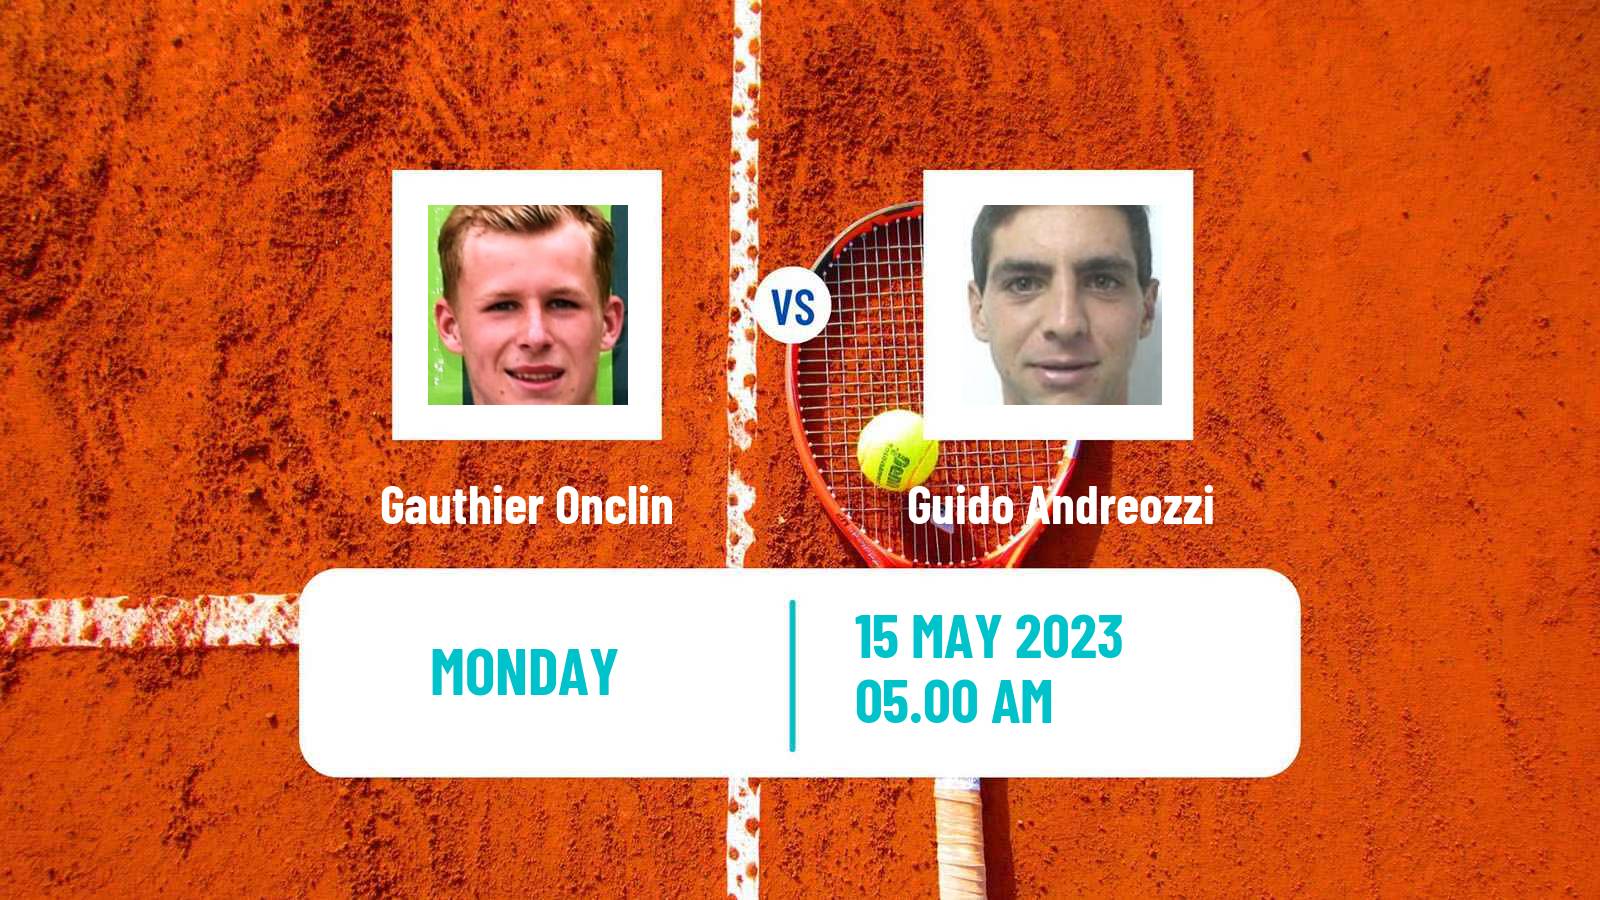 Tennis ATP Challenger Gauthier Onclin - Guido Andreozzi